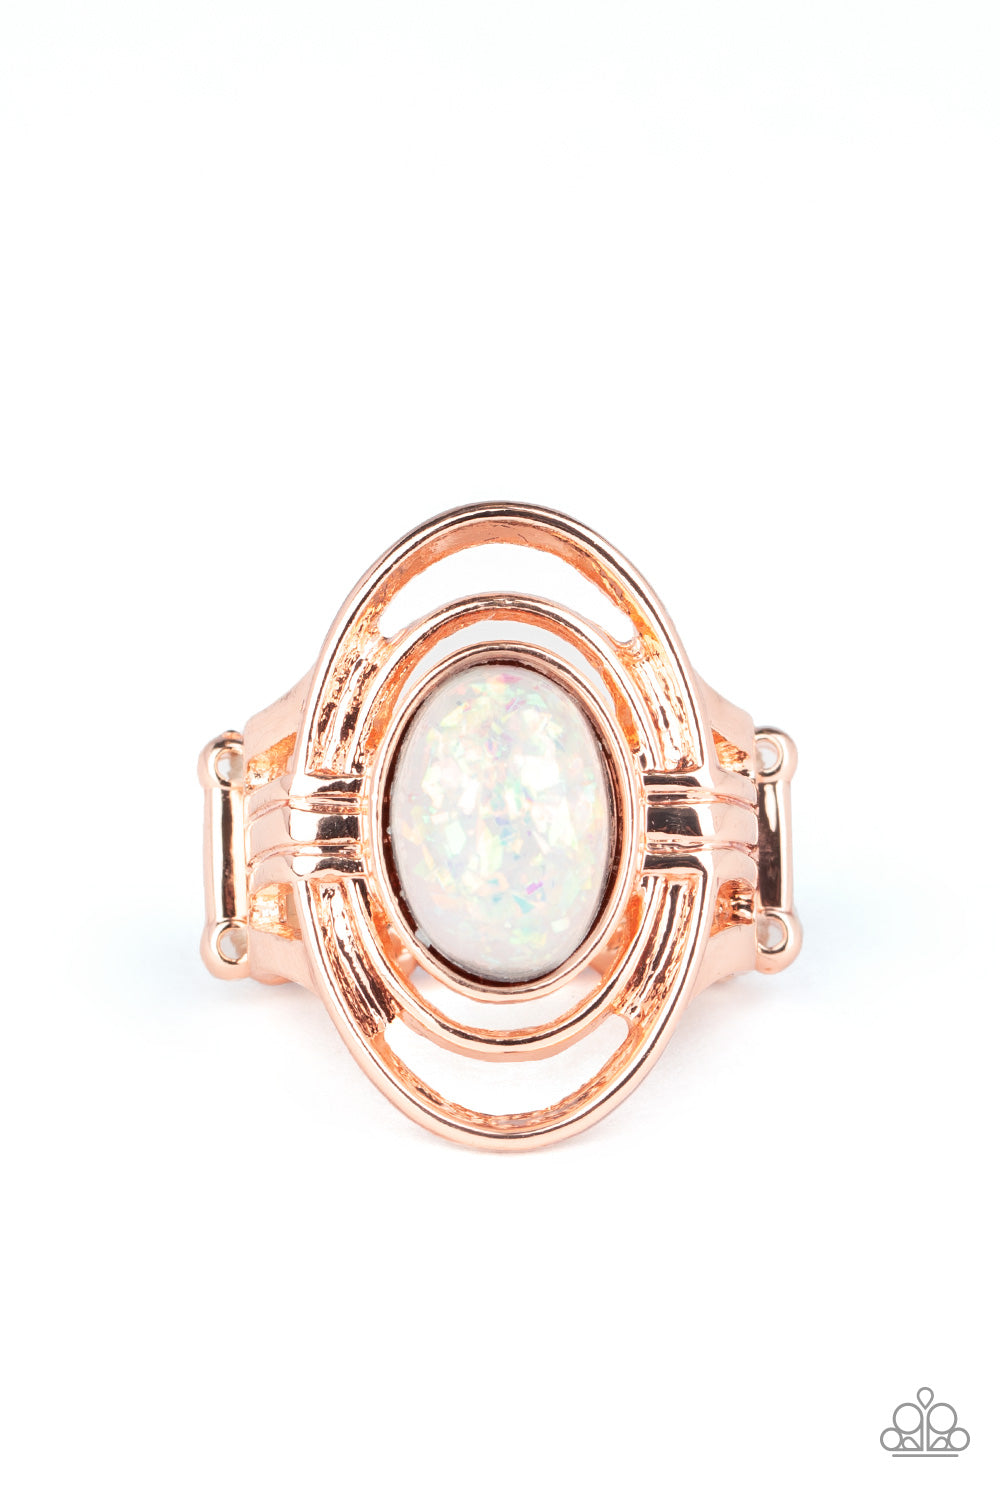 Peacefully Pristine Ring - Rose Gold